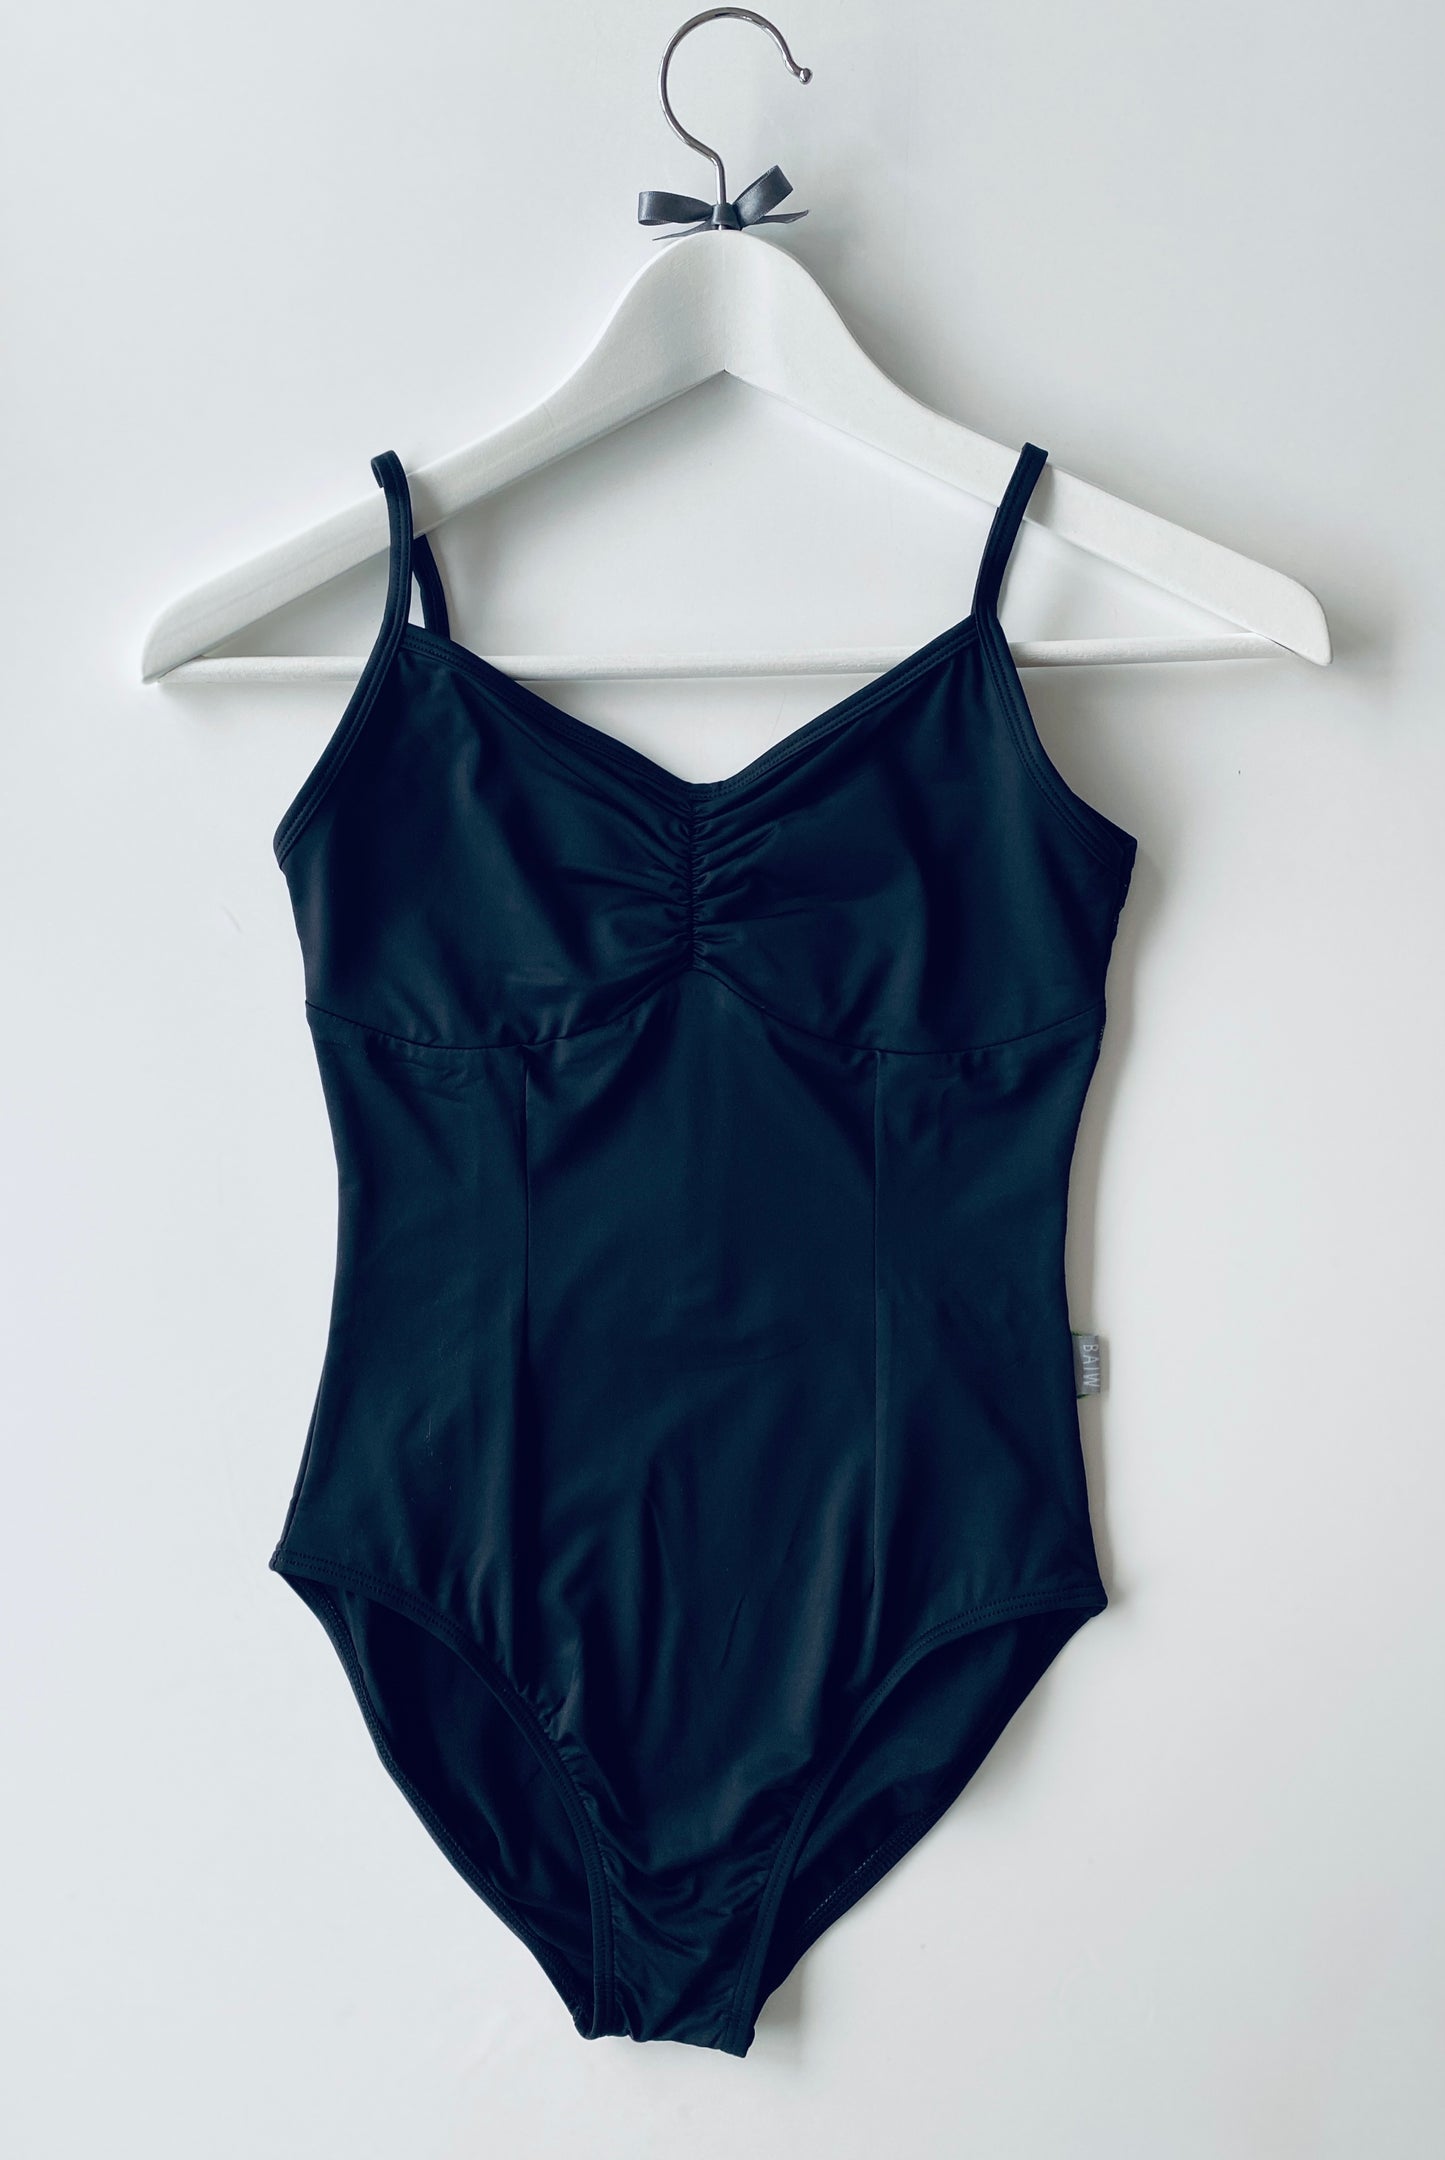 Baiwu  The Classic Camisole with Lace Back - Black from The Collective Dancewear